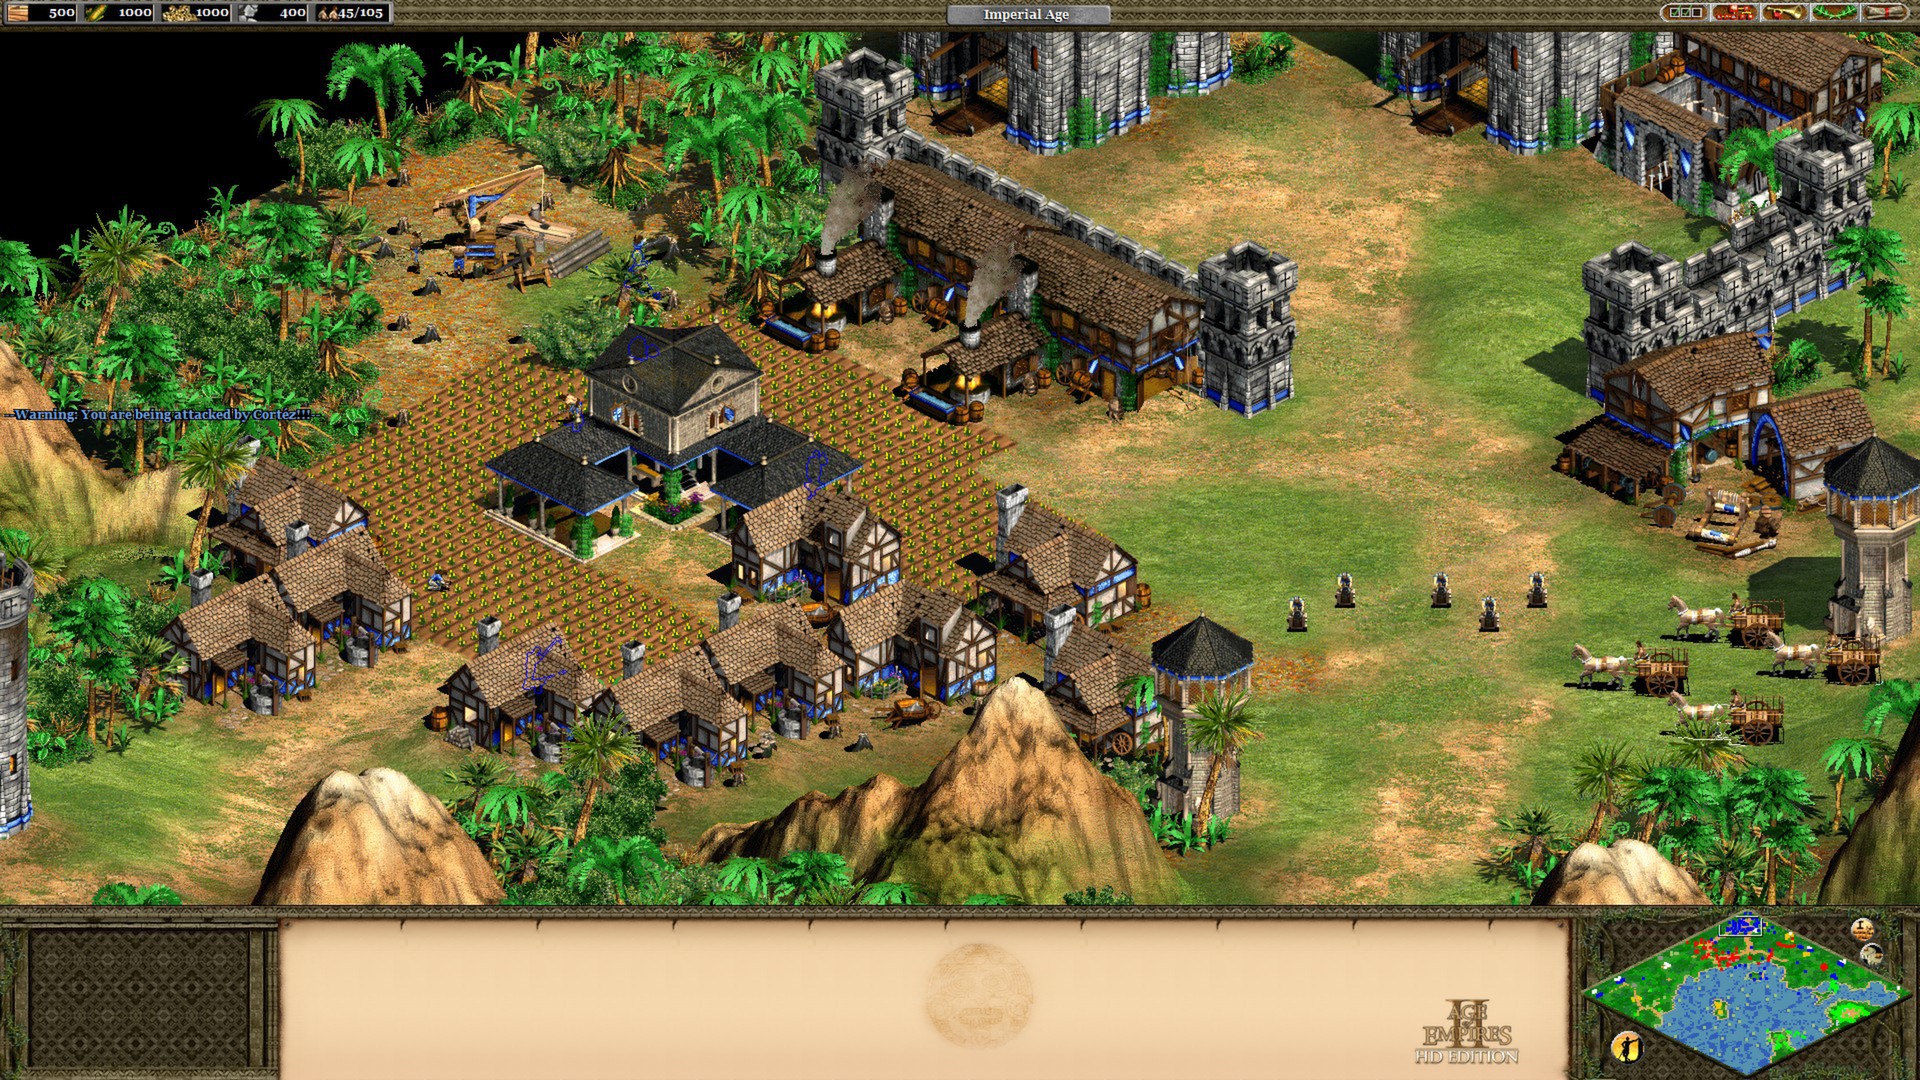 age of empires 2 hd change resolution